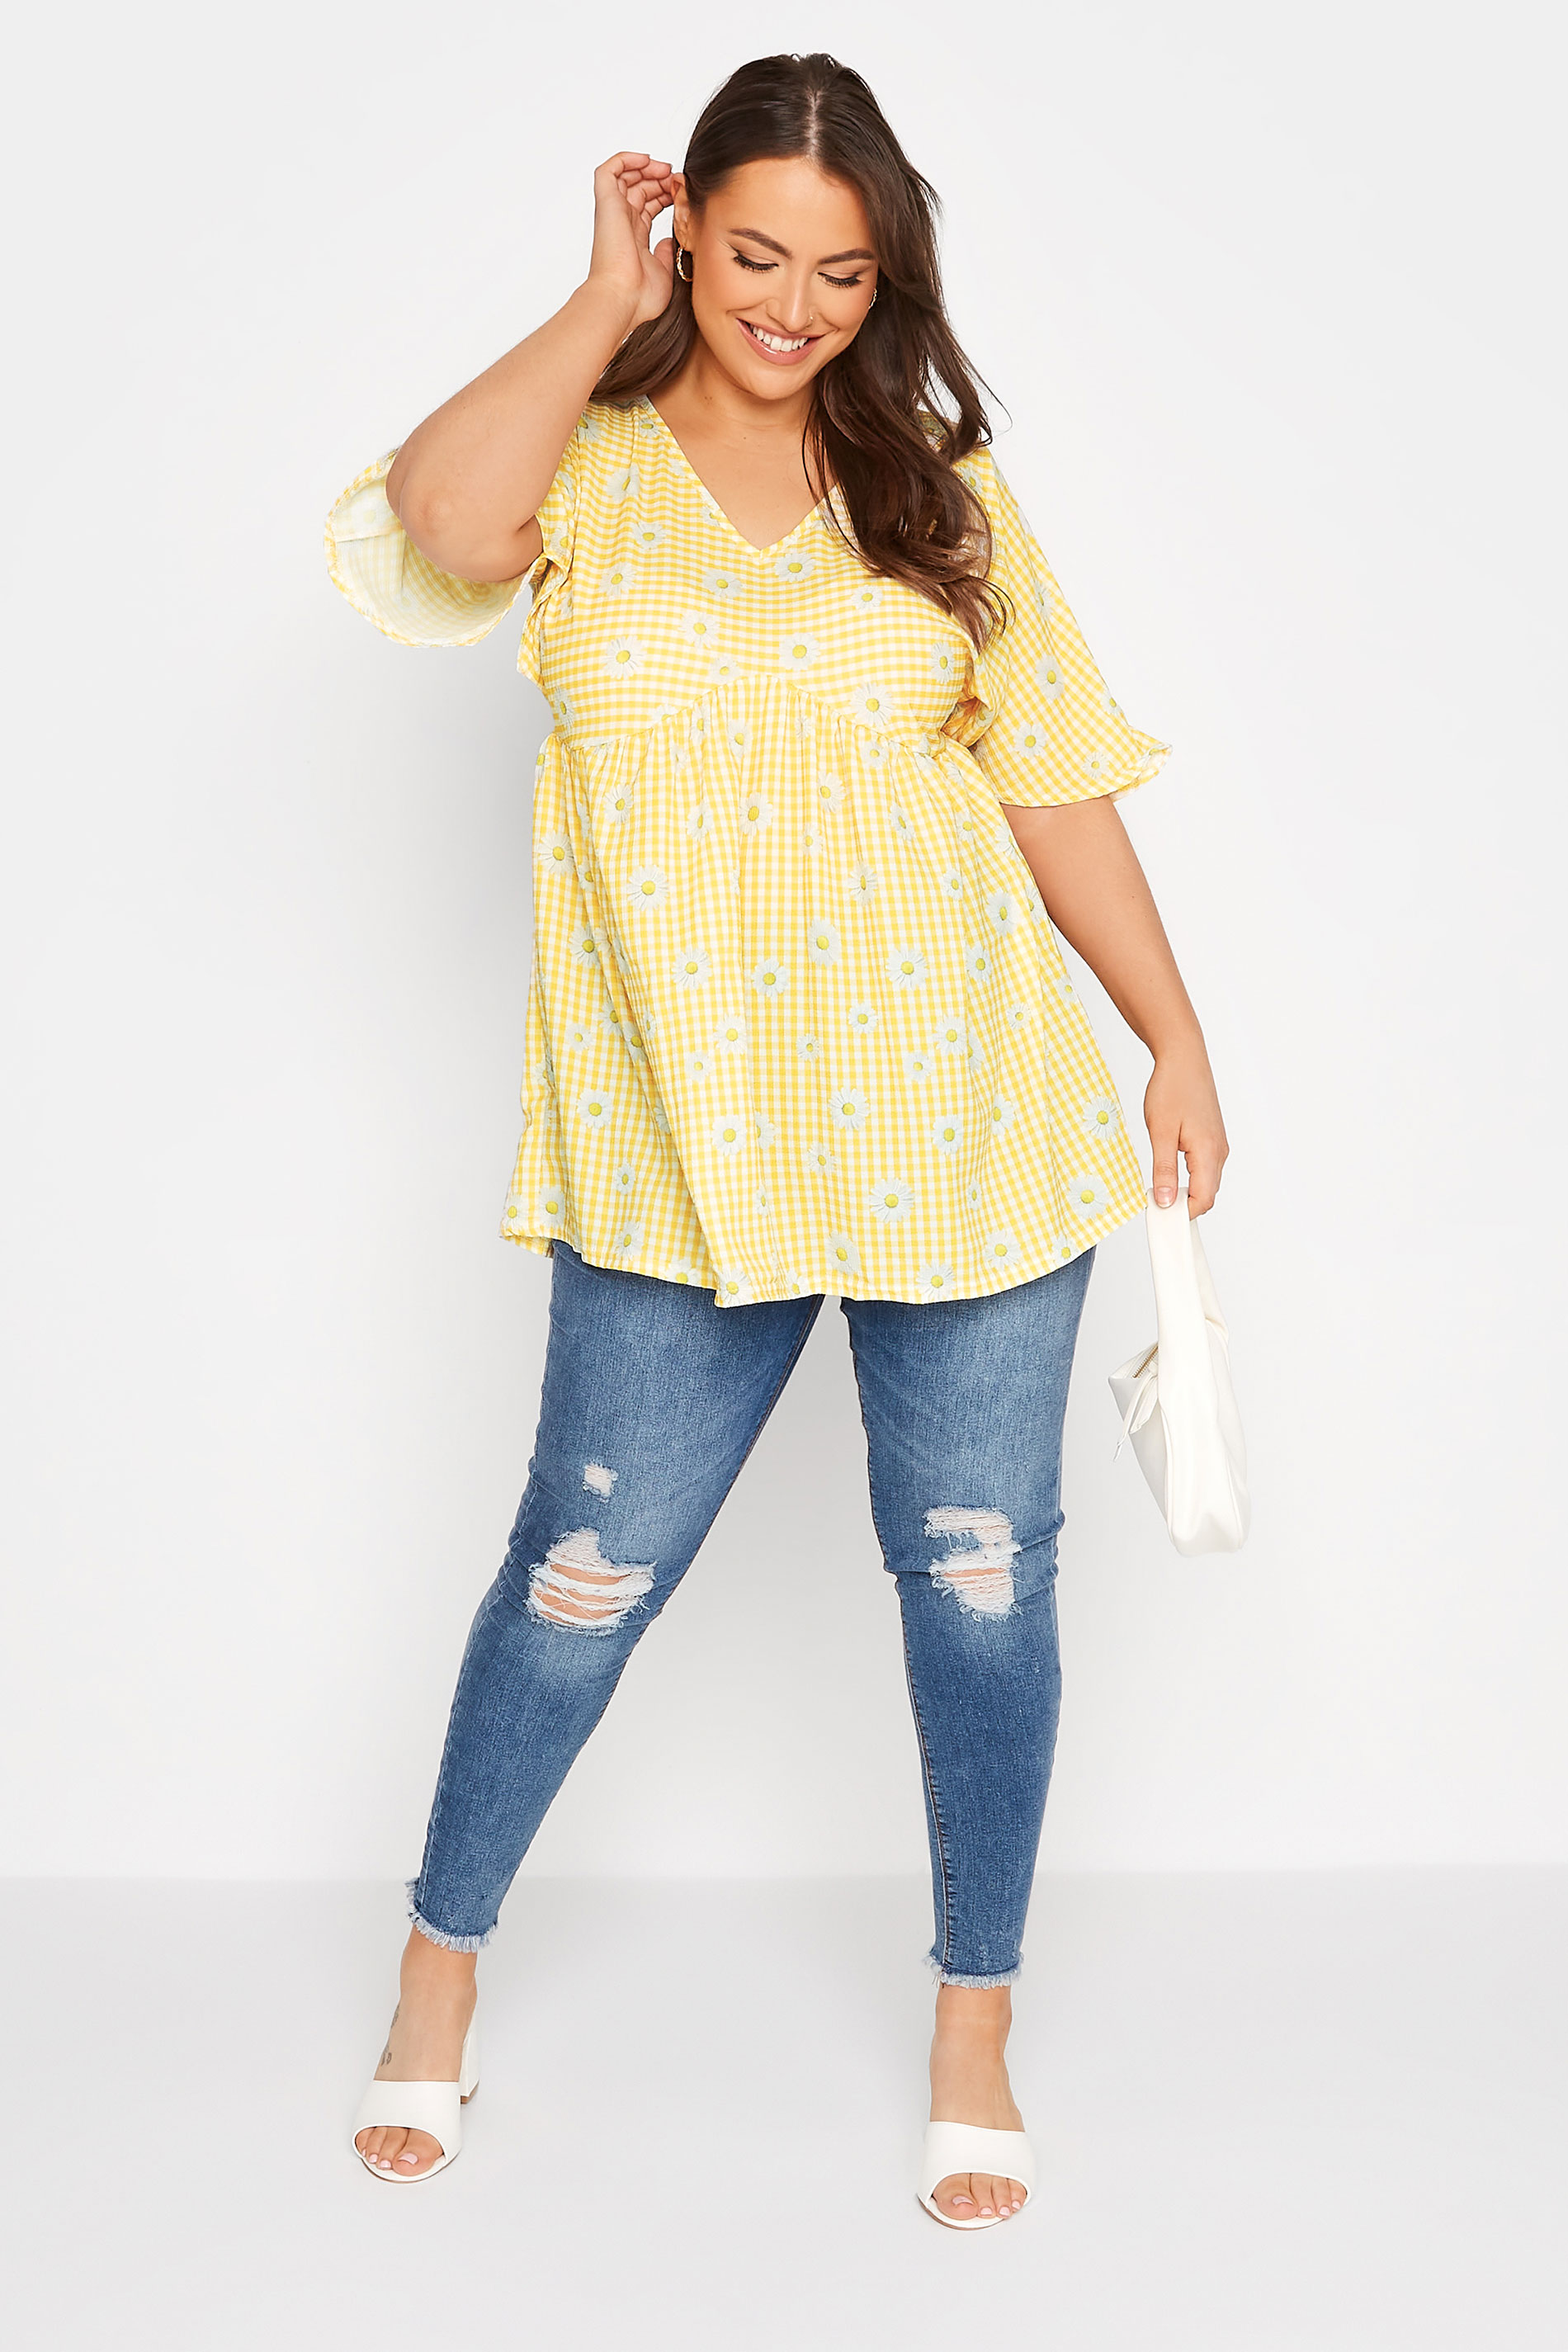 Grande taille  Tops Grande taille  Tops Péplum | LIMITED COLLECTION - Top Jaune Style Kimono Marguerites - ZS21188